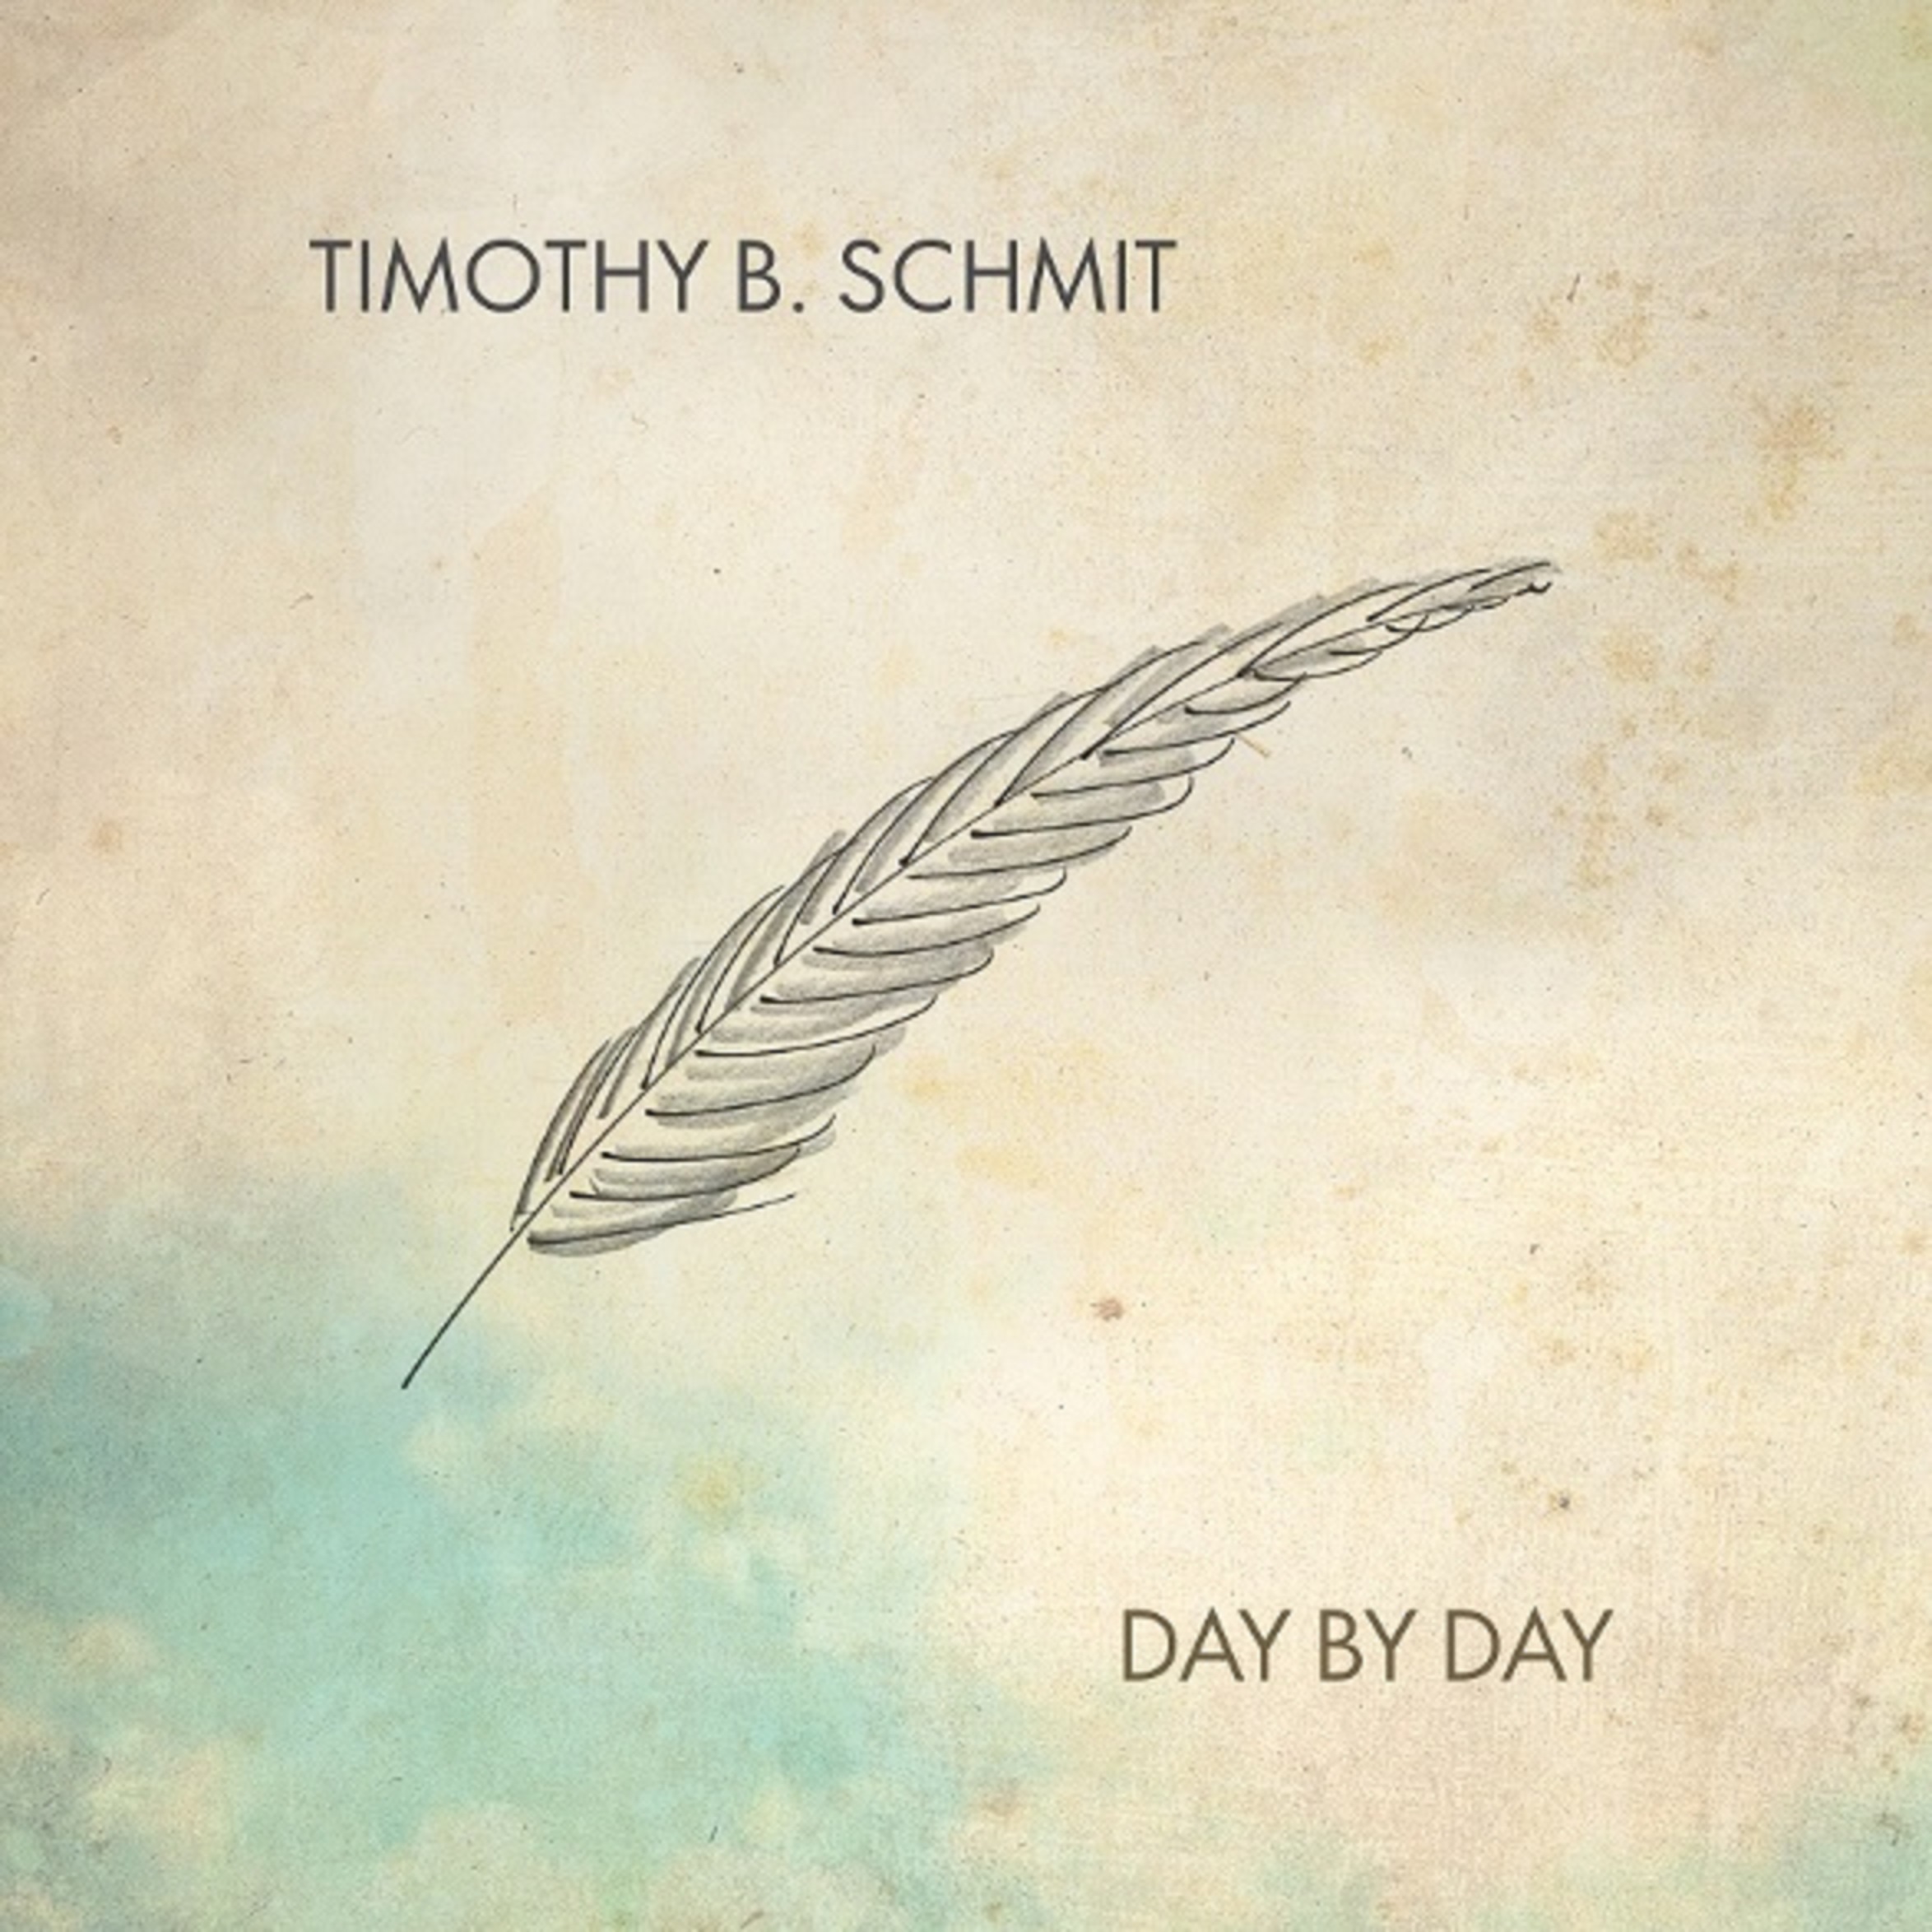 TIMOTHY B. SCHMIT Shares “Heartbeat,” The Second Single From His Solo Album ‘Day By Day,’ Out 5/6